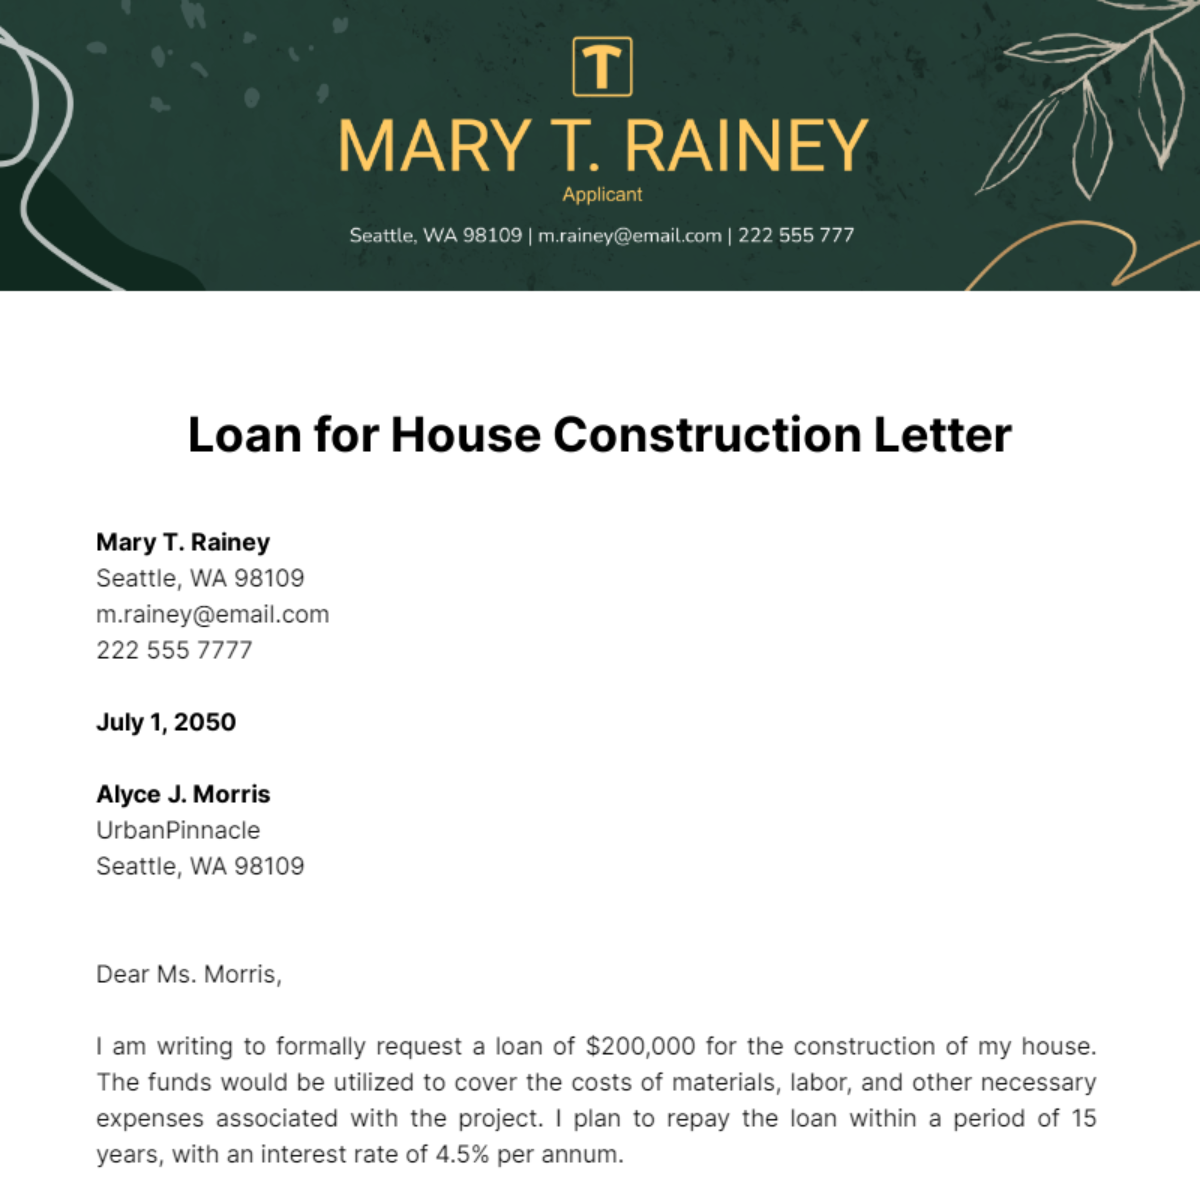 Loan for House Construction Letter Template